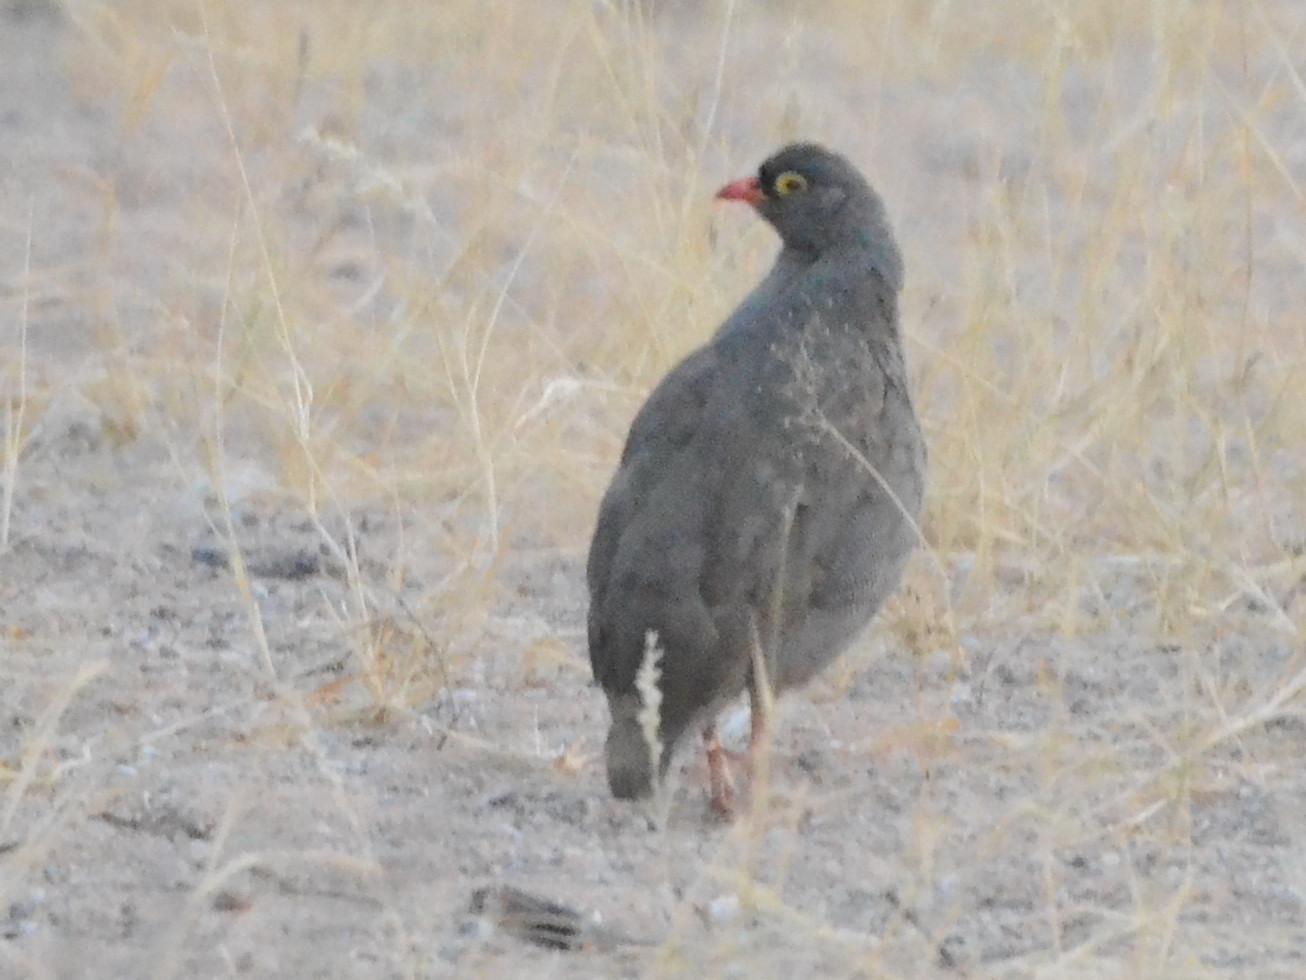 Click picture to see more Red-billed Francolins (Spurfowls).